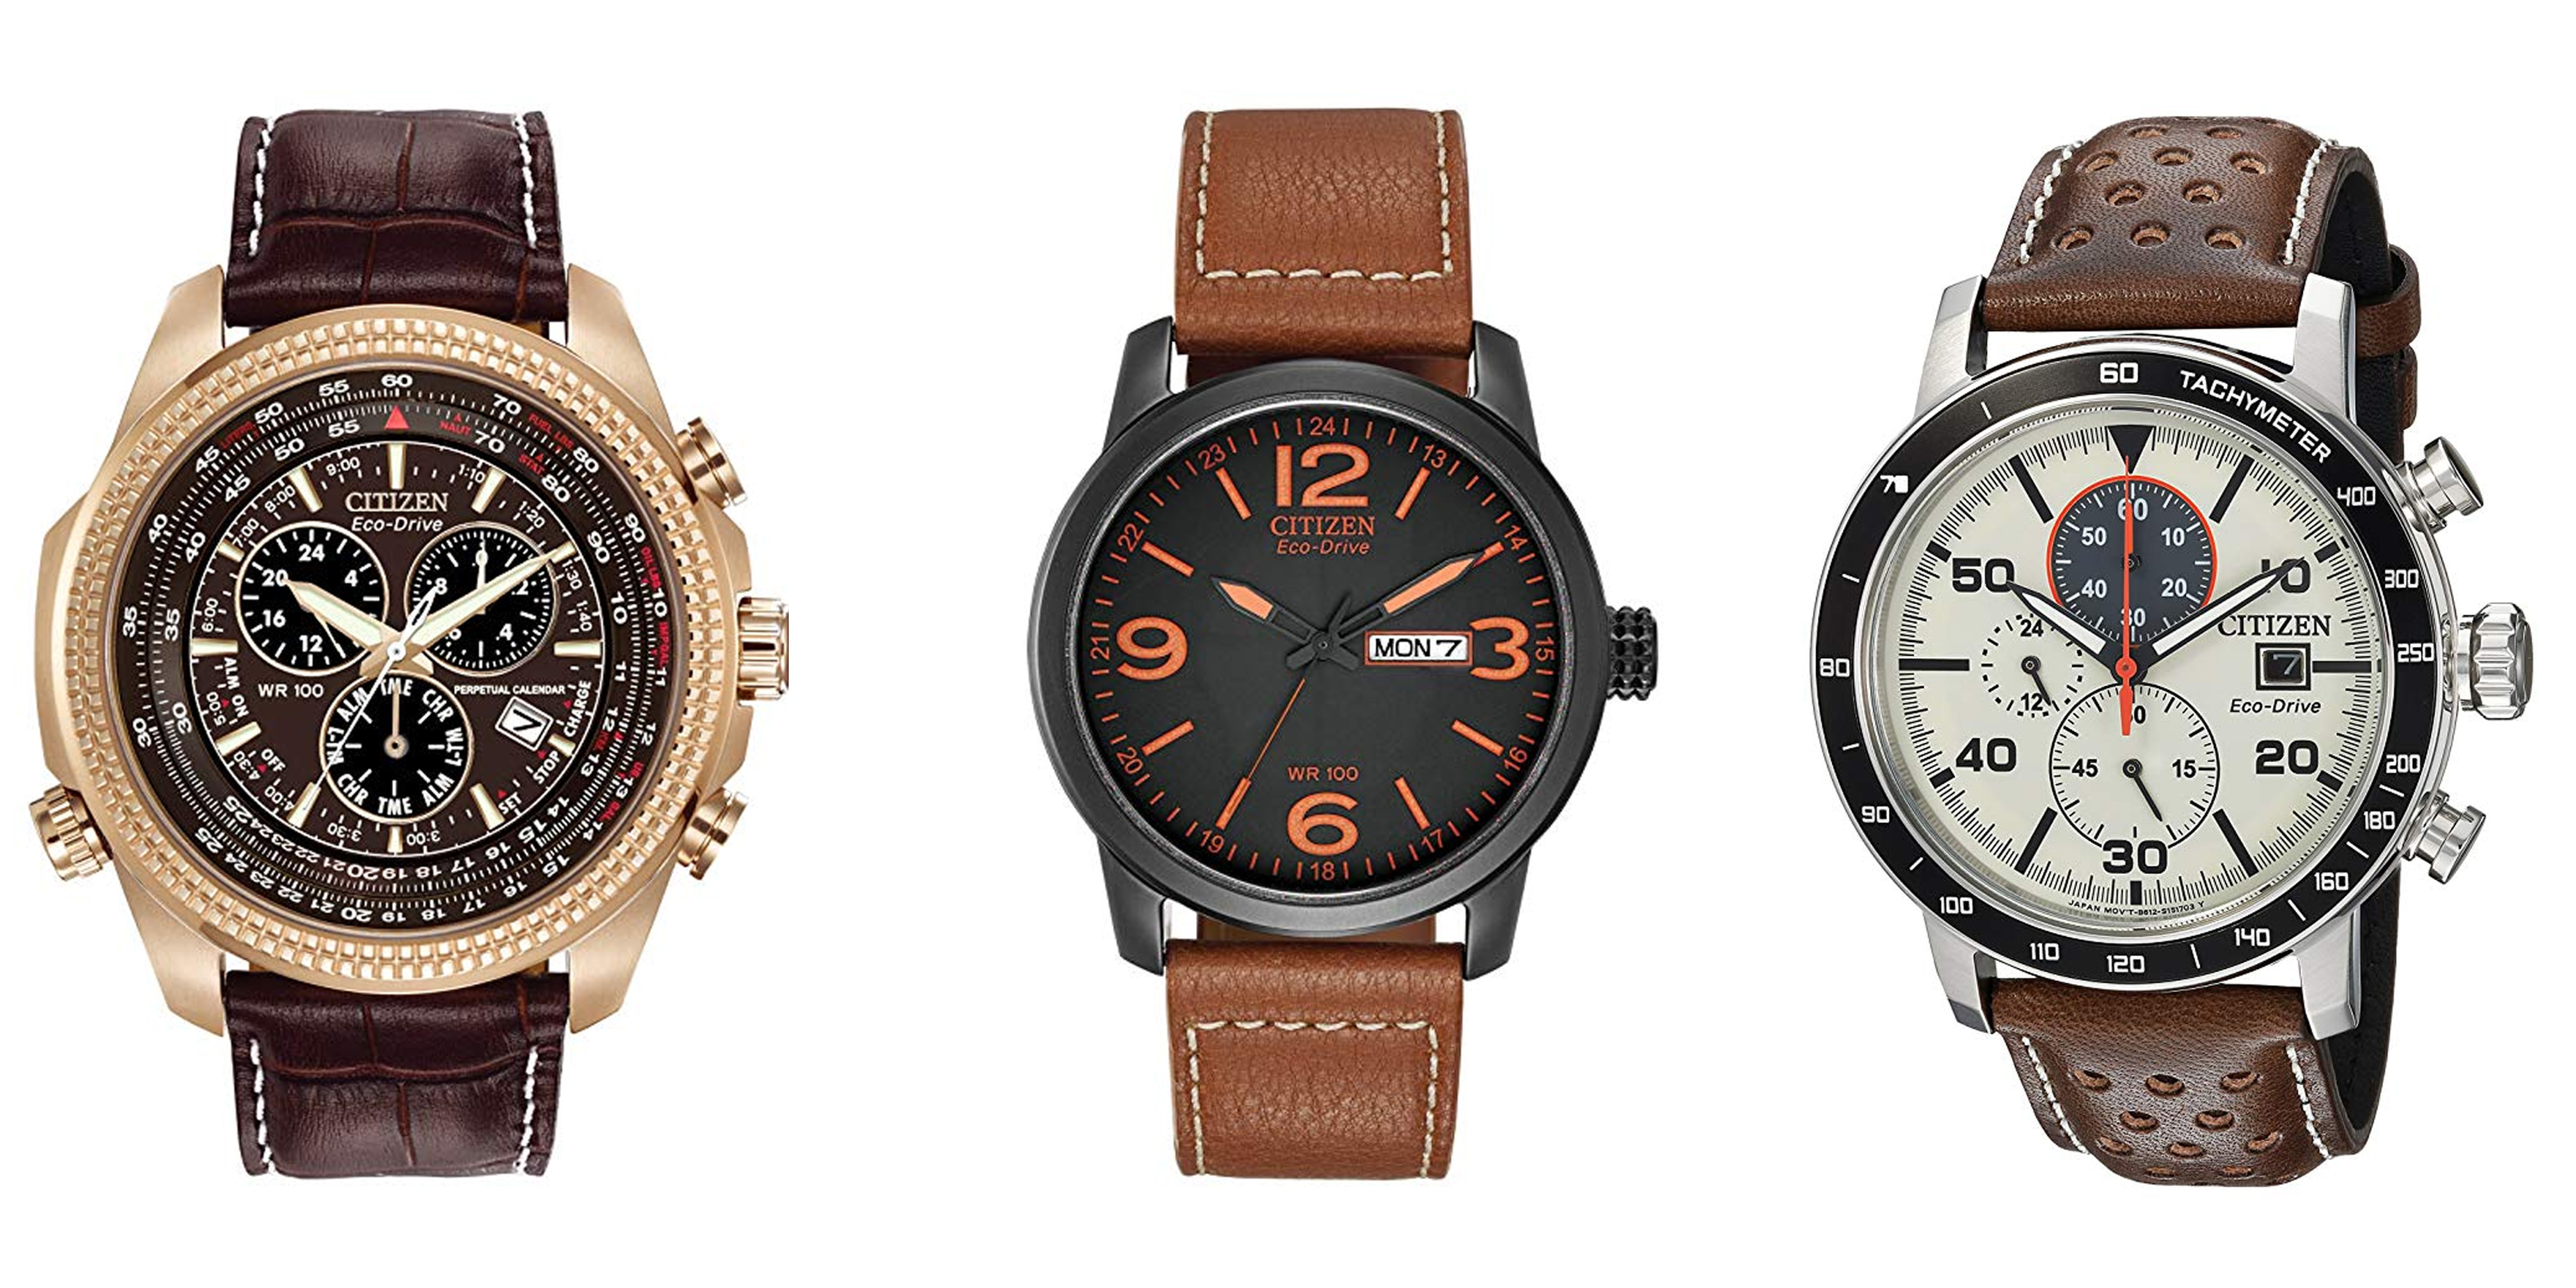 Citizen watches up to 40% off from $65 shipped at Amazon, today only